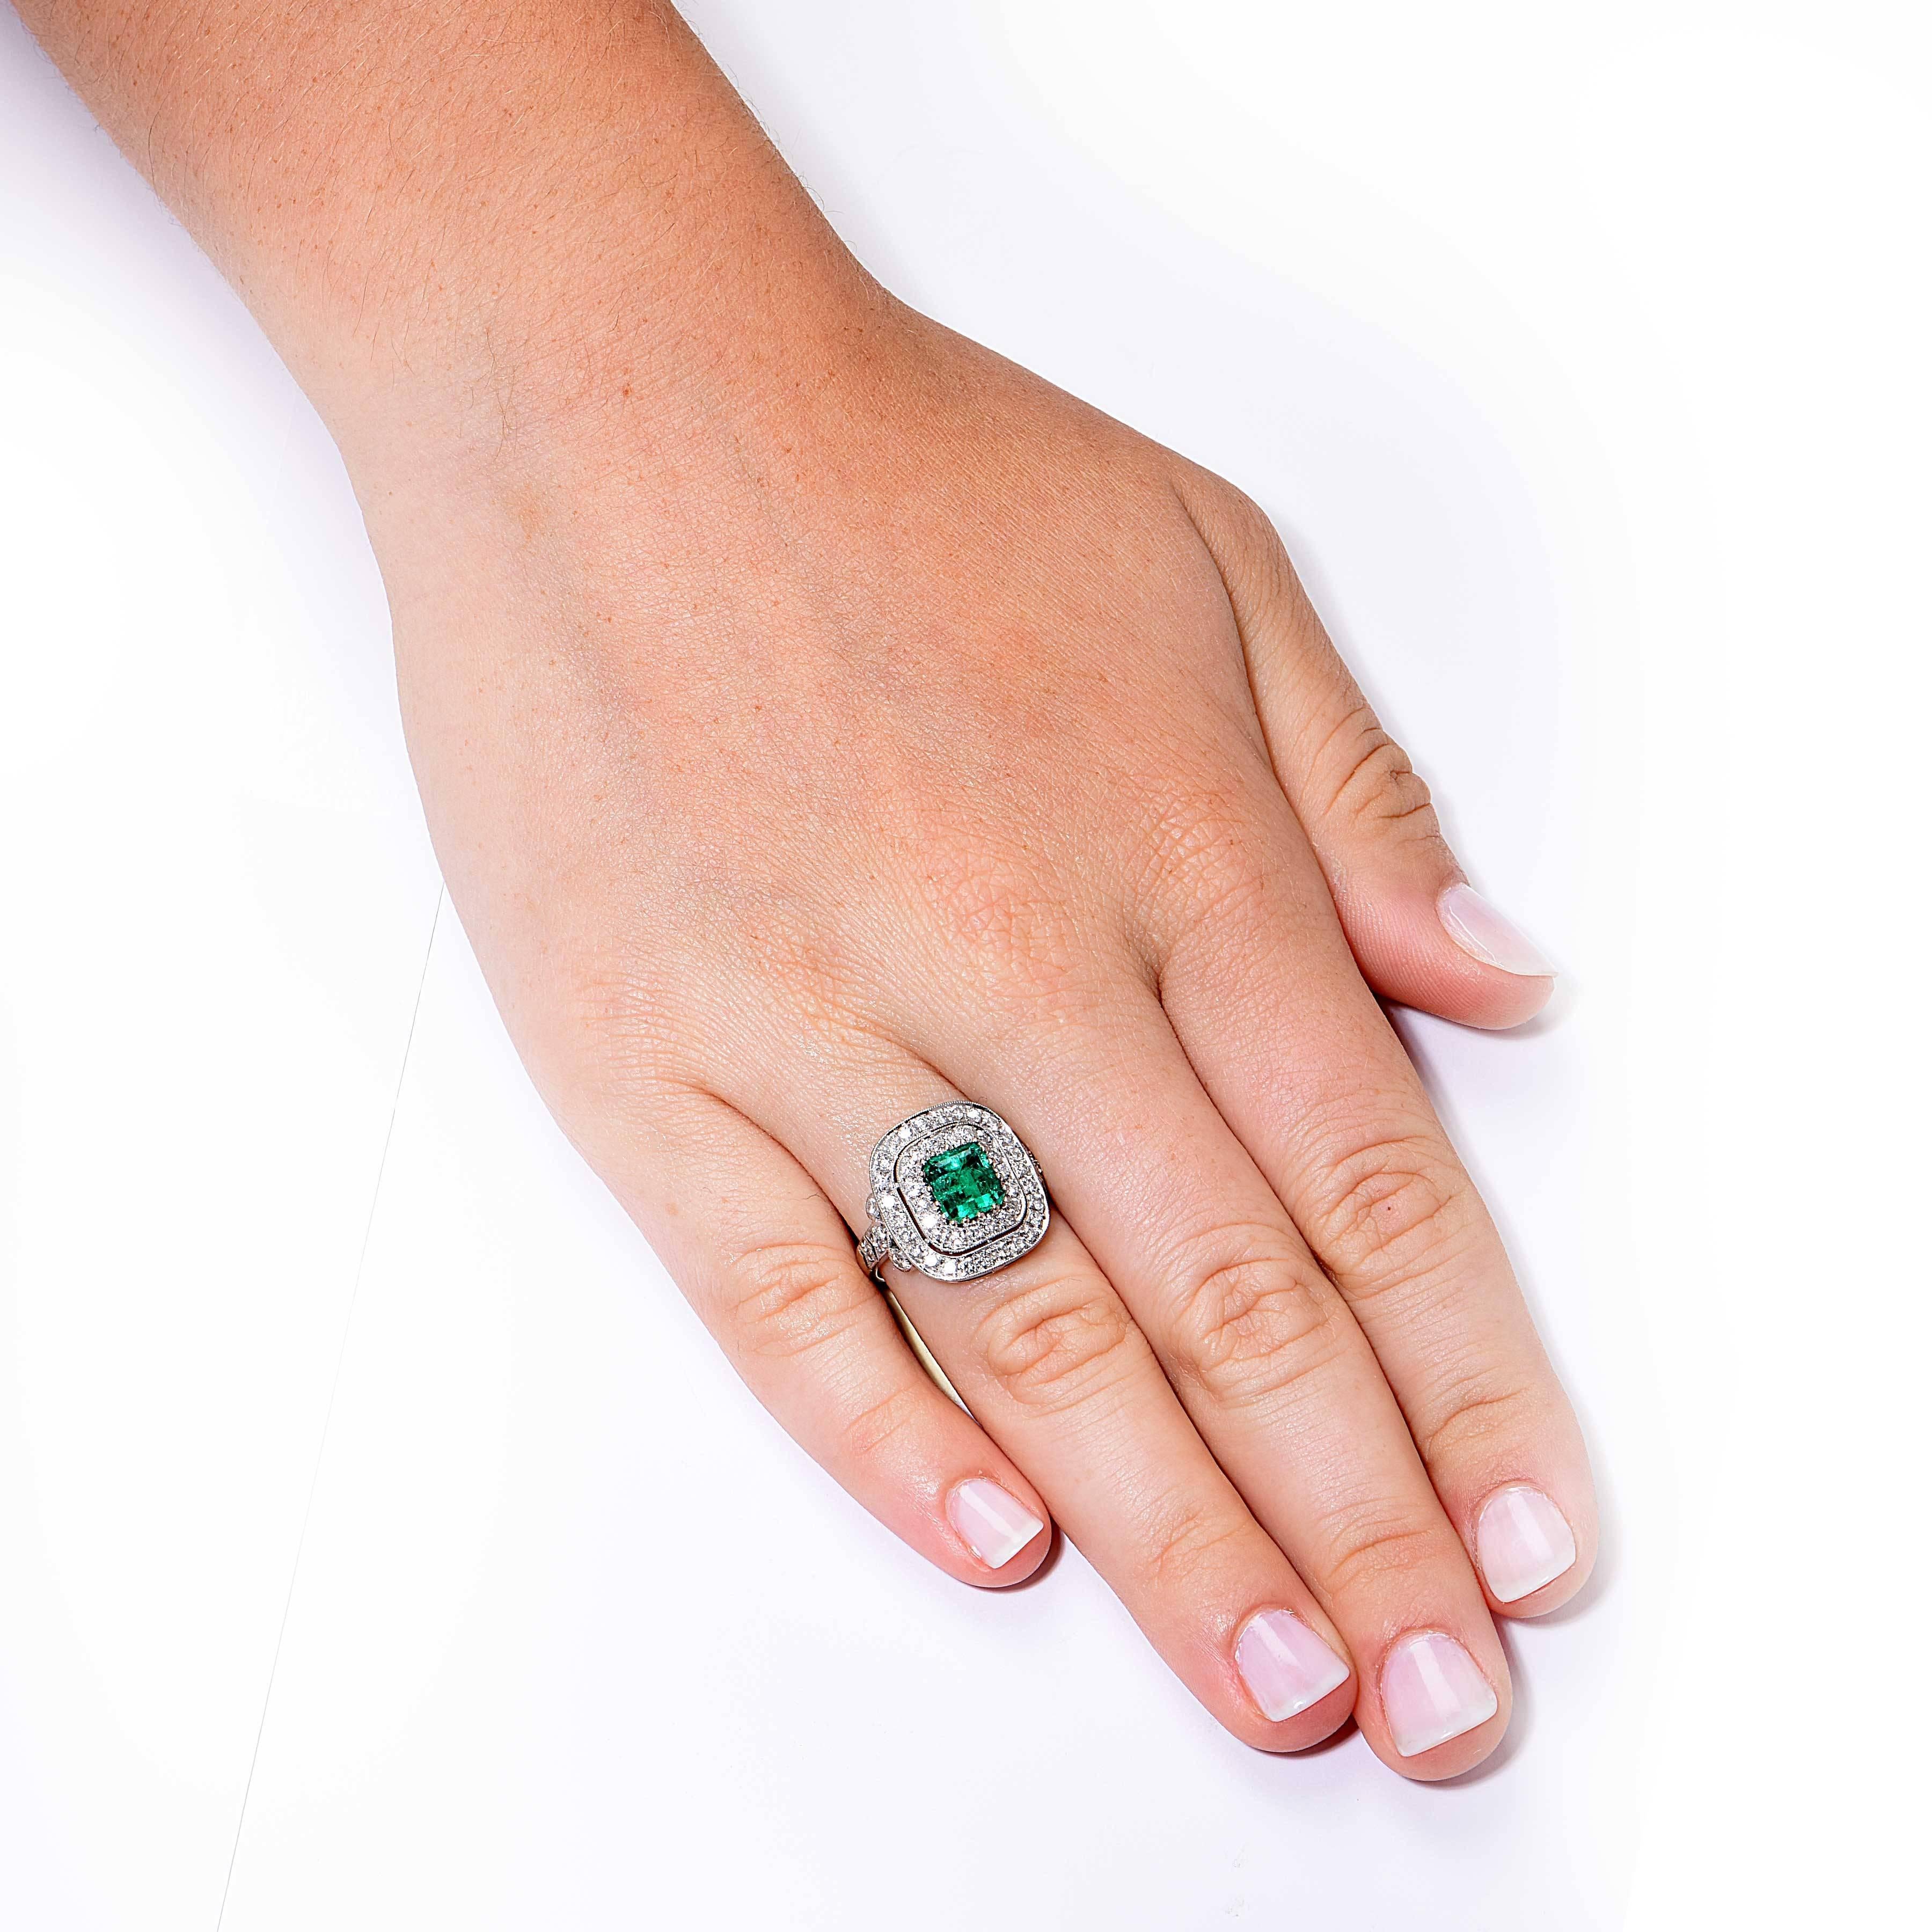 This beautiful ring features a natural emerald with an approximate weight of 1.5 carats surrounded by 58 round brilliant cut diamonds with an approximate weight of 1.5 carats. 

Ring size: 6 3/4 (can be sized)
Metal Type: 18 Kt White Gold (stamped